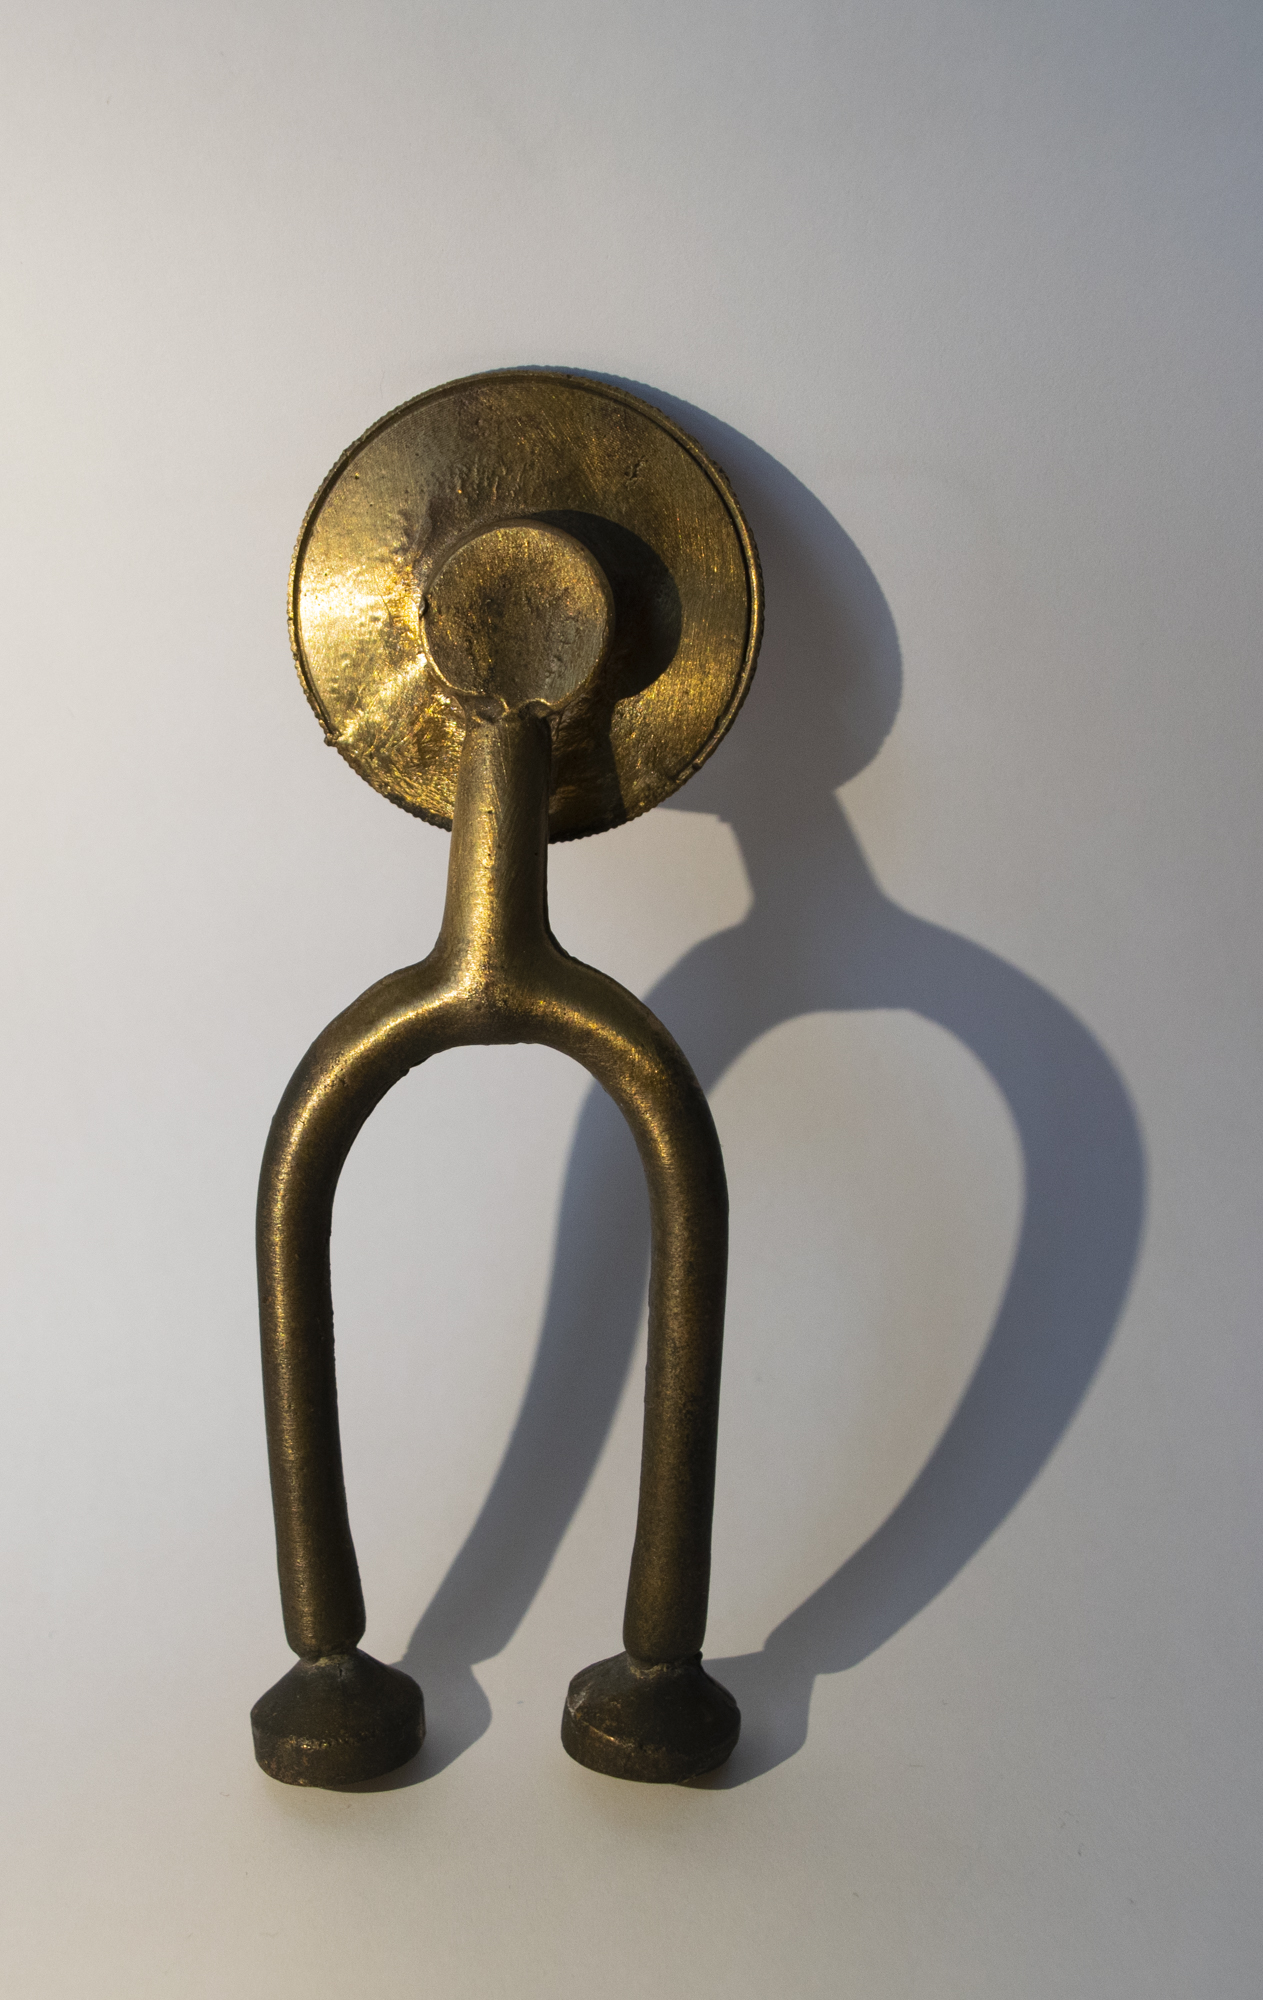 BA Fine Art work by Freya Parfitt showing a bronze cast, similar in shape to a stethoscope but shorter and featuring funnels instead of earpieces.